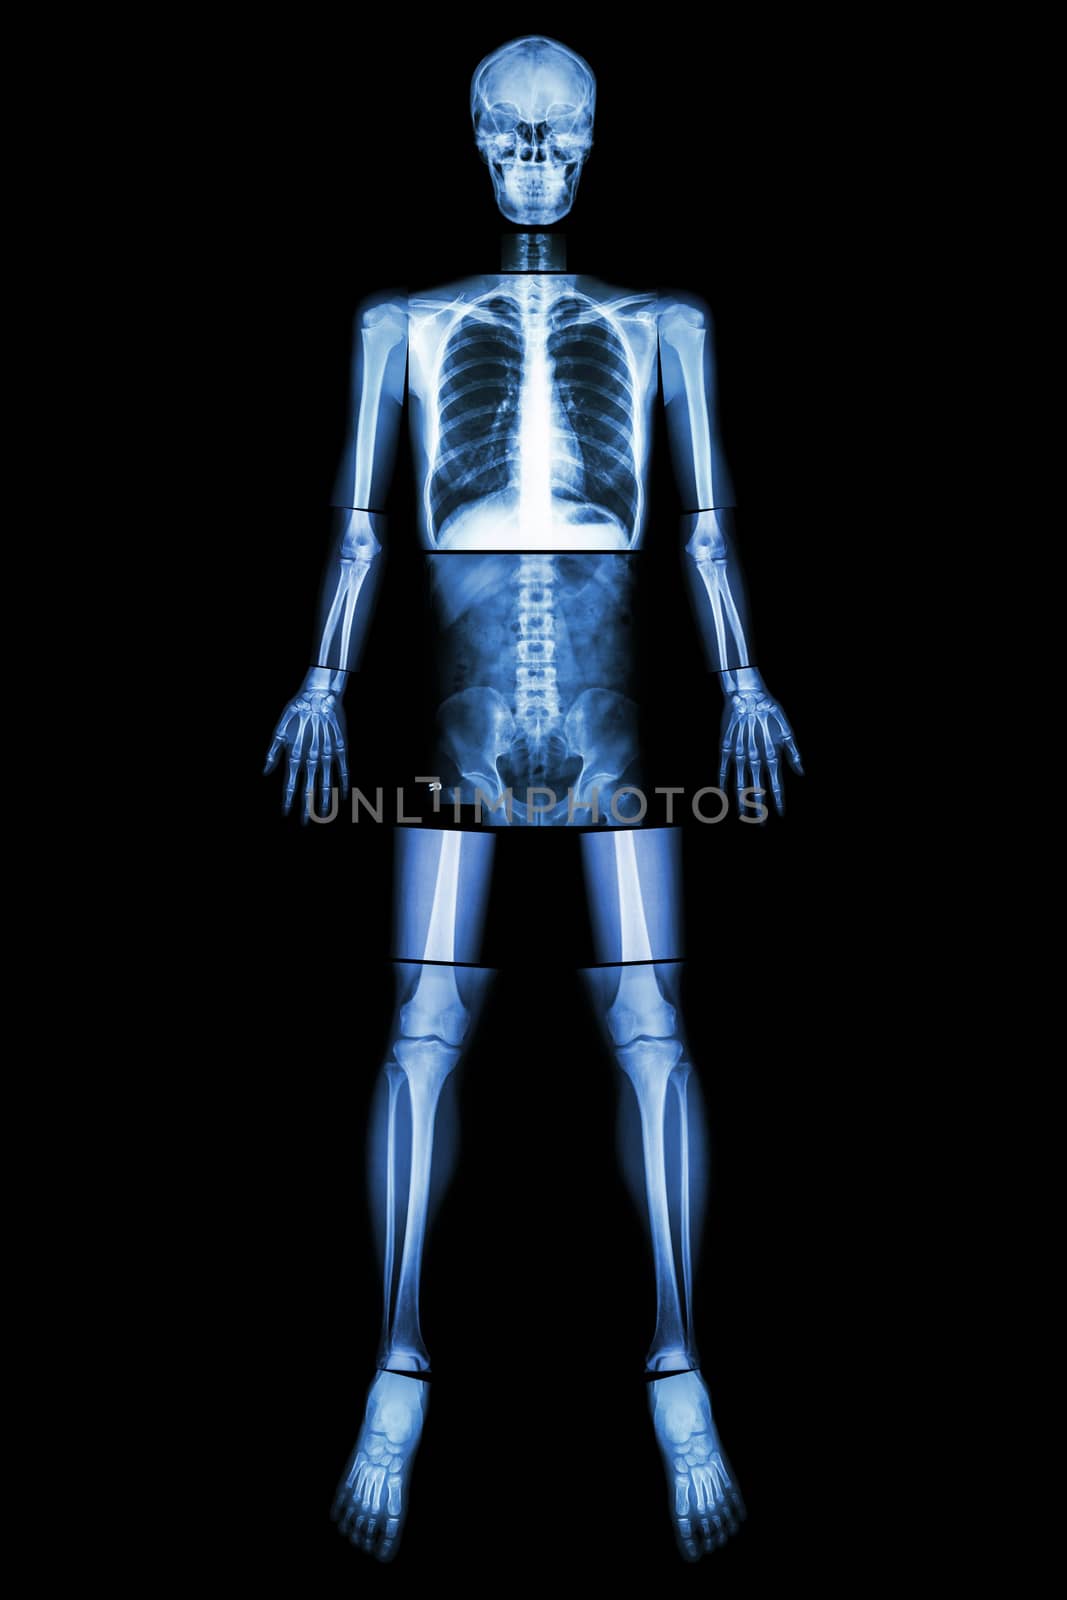 Anatomical Position. (X-ray whole body : head ,neck ,thorax ,heart ,lung ,rib ,shoulder ,scapula ,arm ,forearm ,elbow ,wrist ,hand ,digit ,abdomen ,hip ,pelvic ,leg ,thigh ,knee ,ankle ,heel ,foot )